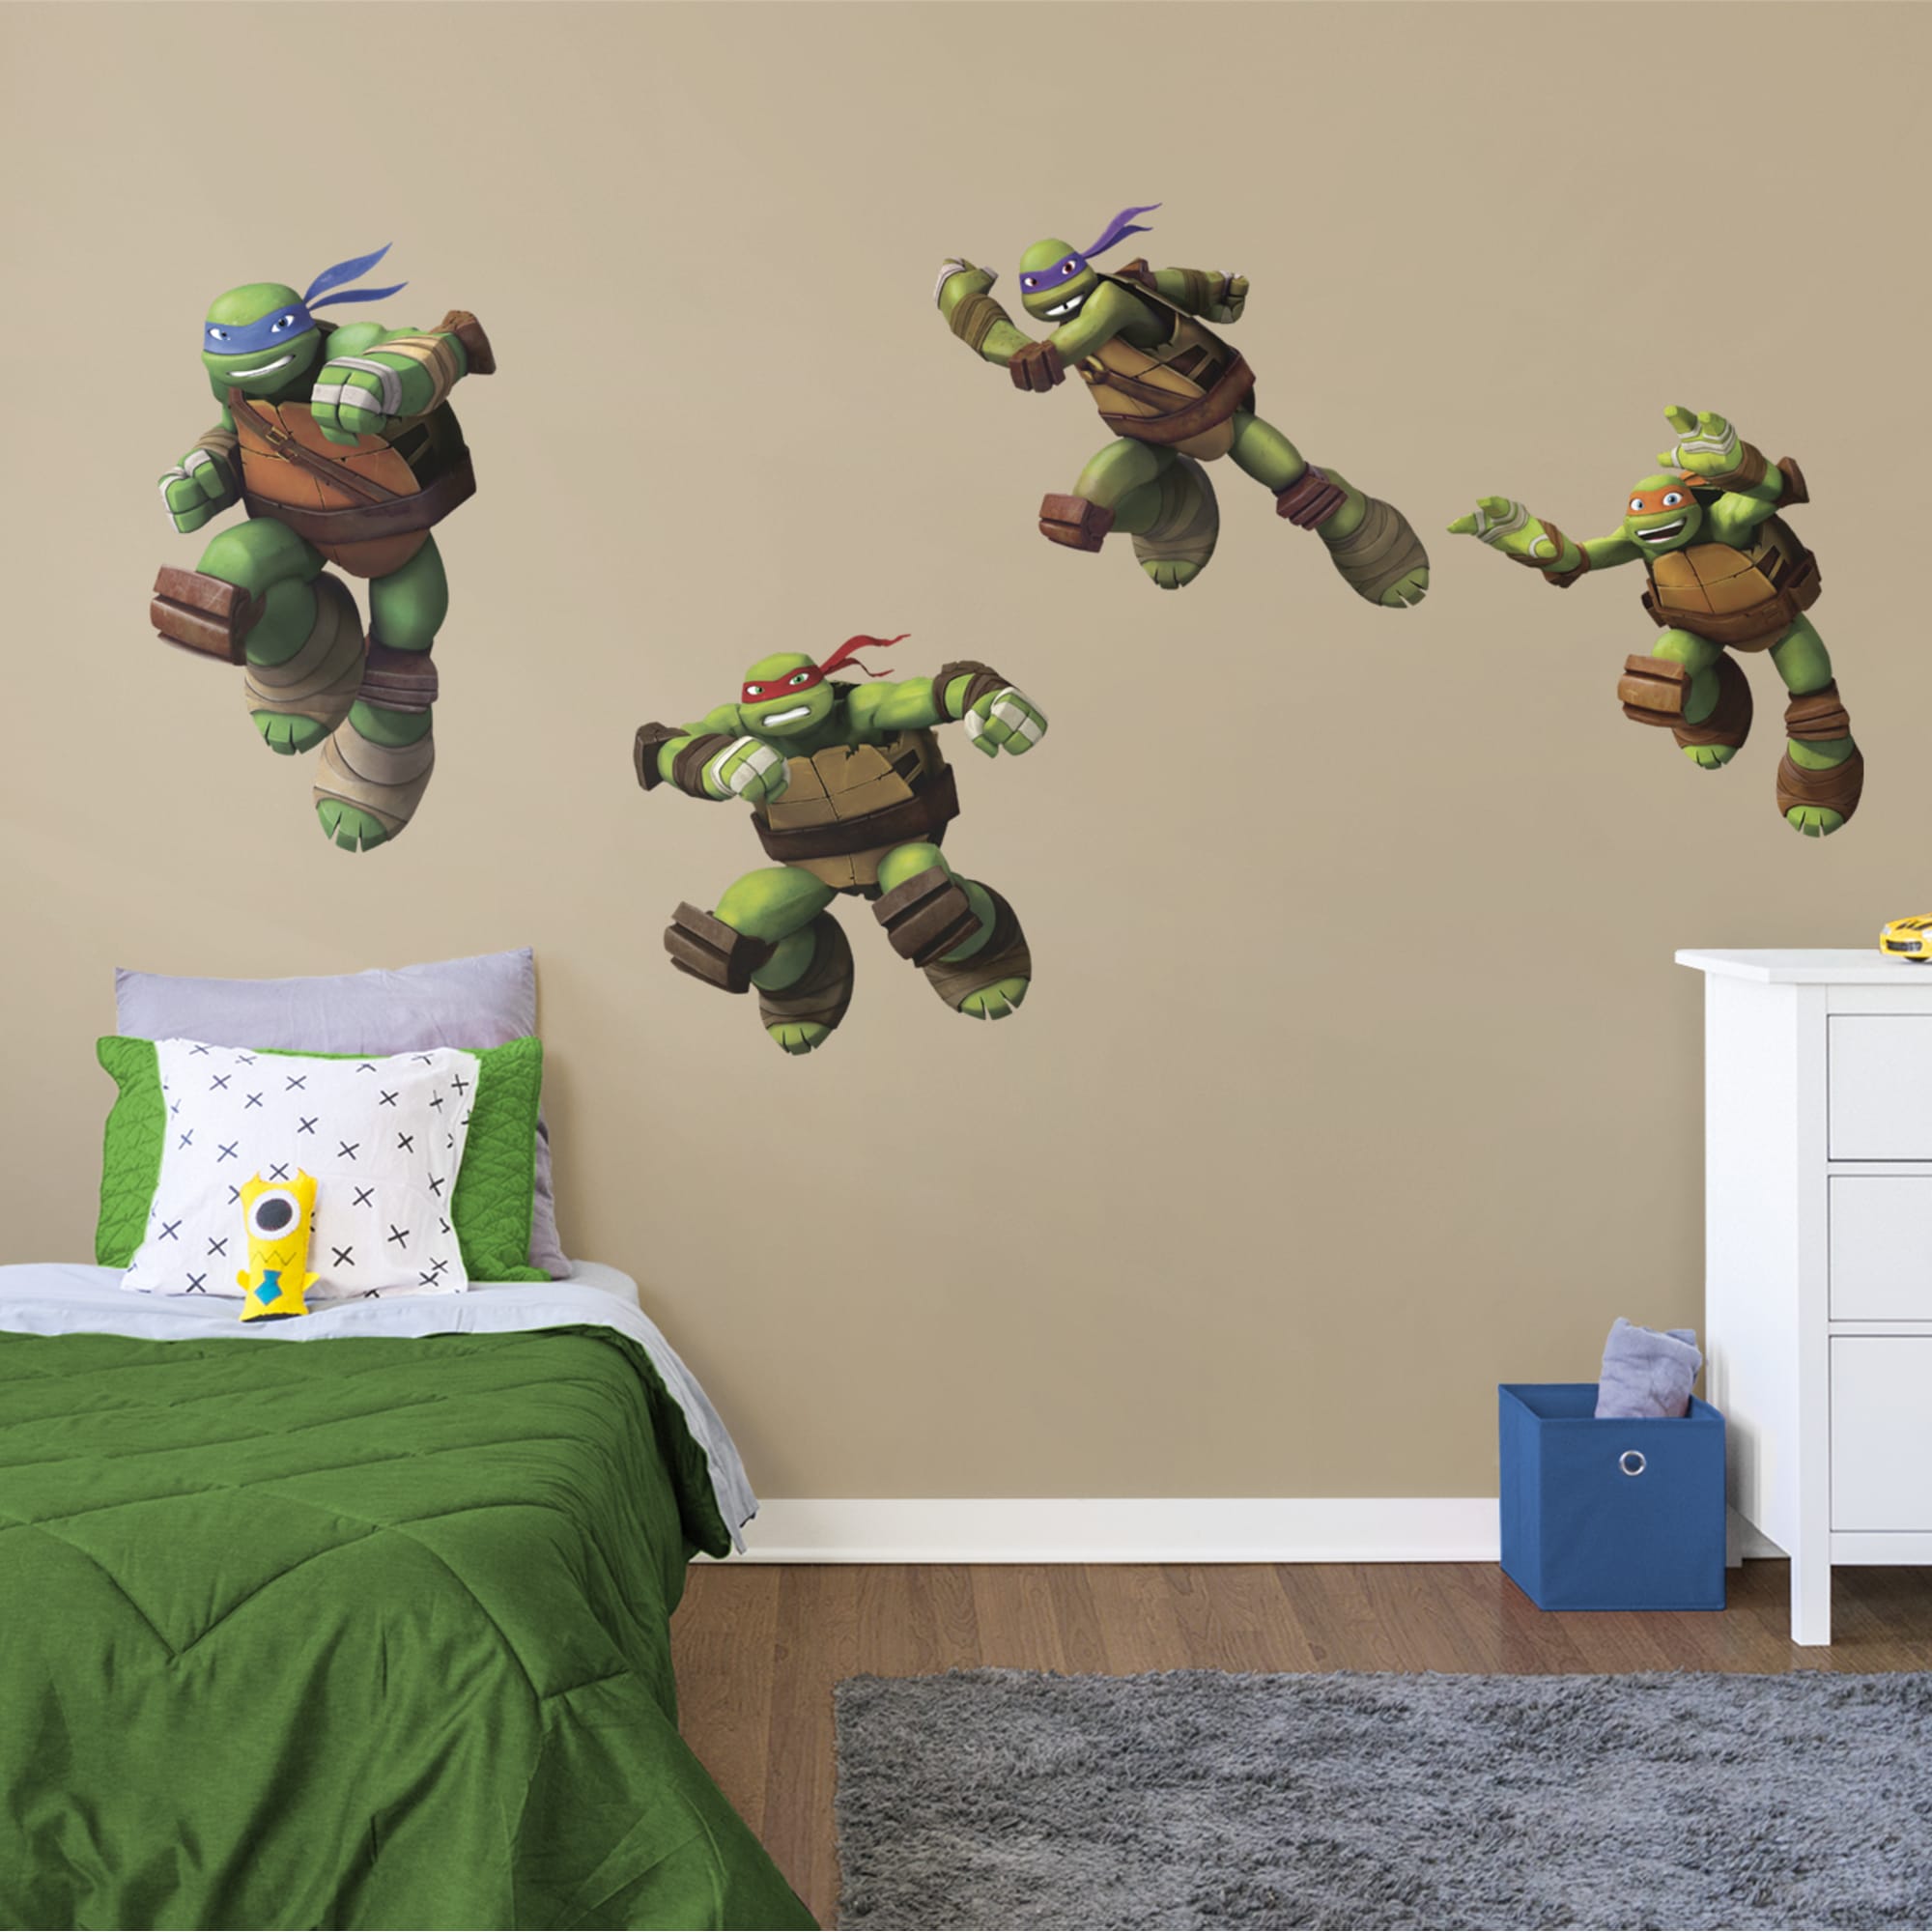 Teenage Mutant Ninja Turtles: Turtle Power Collection - Officially Licensed Removable Wall Decal 52.0"W x 79.0"H by Fathead | Vi